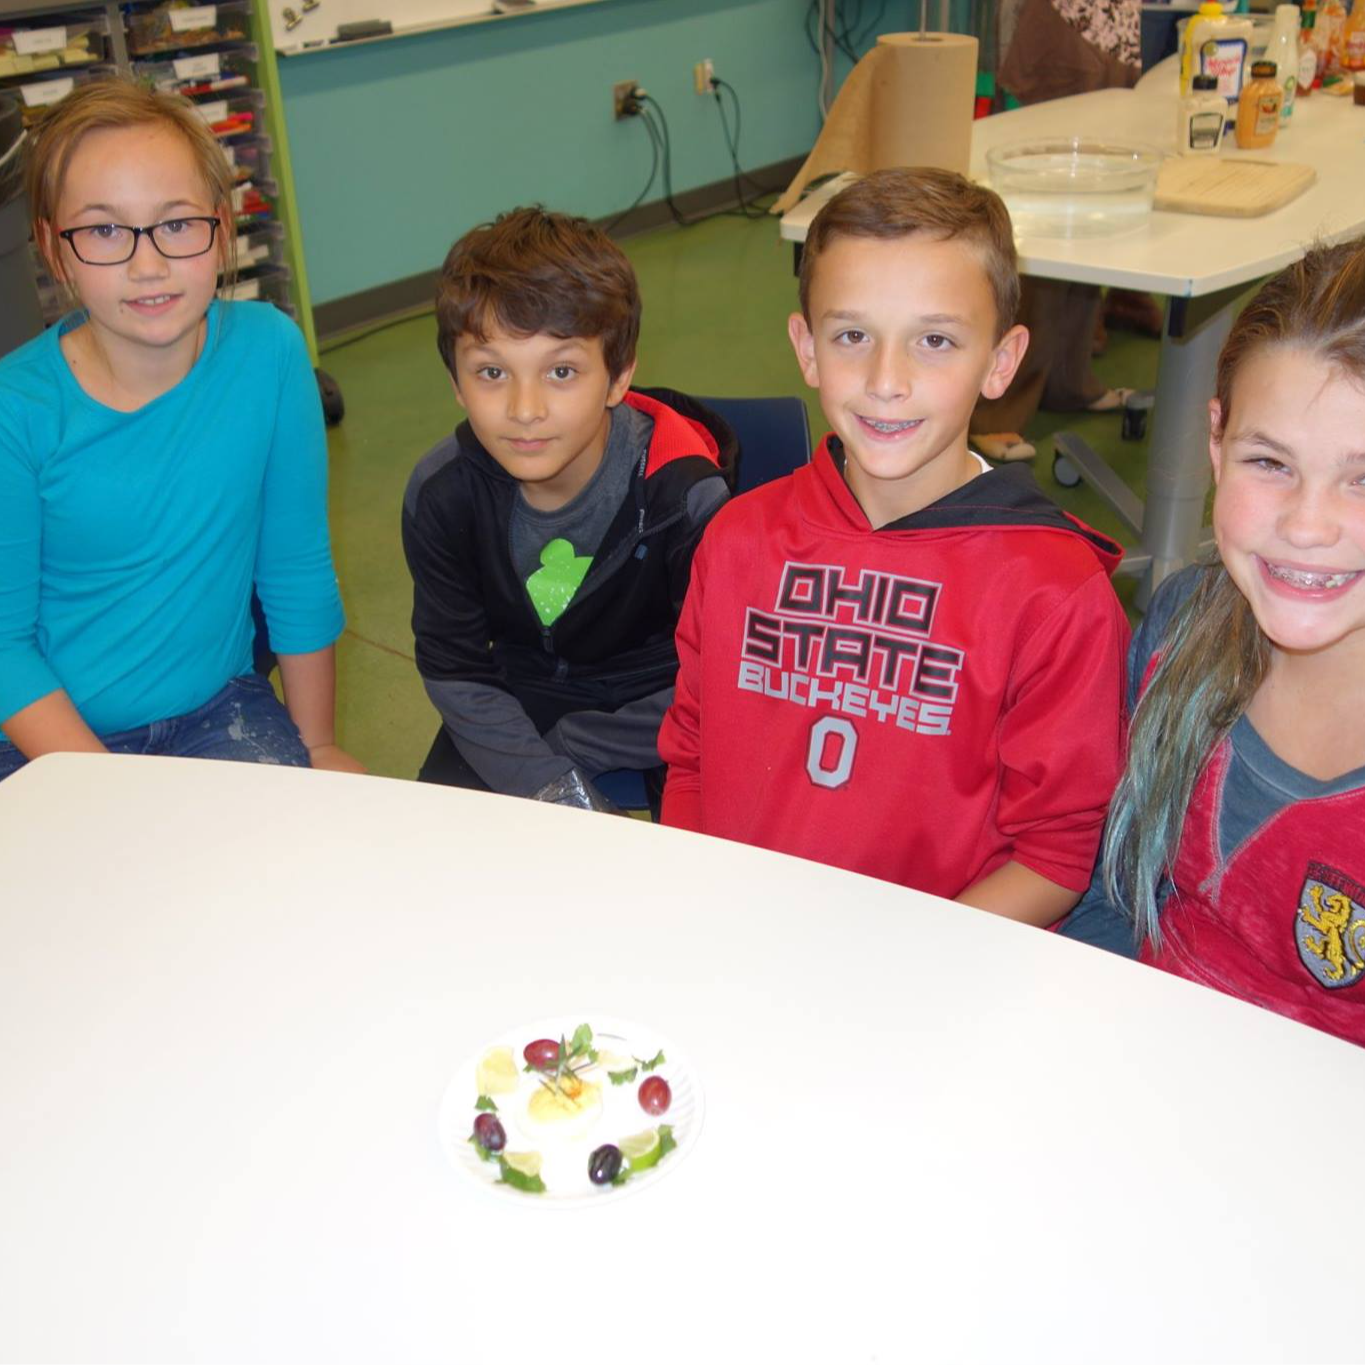 Students at a table with a few fruits and vegetables on a plate